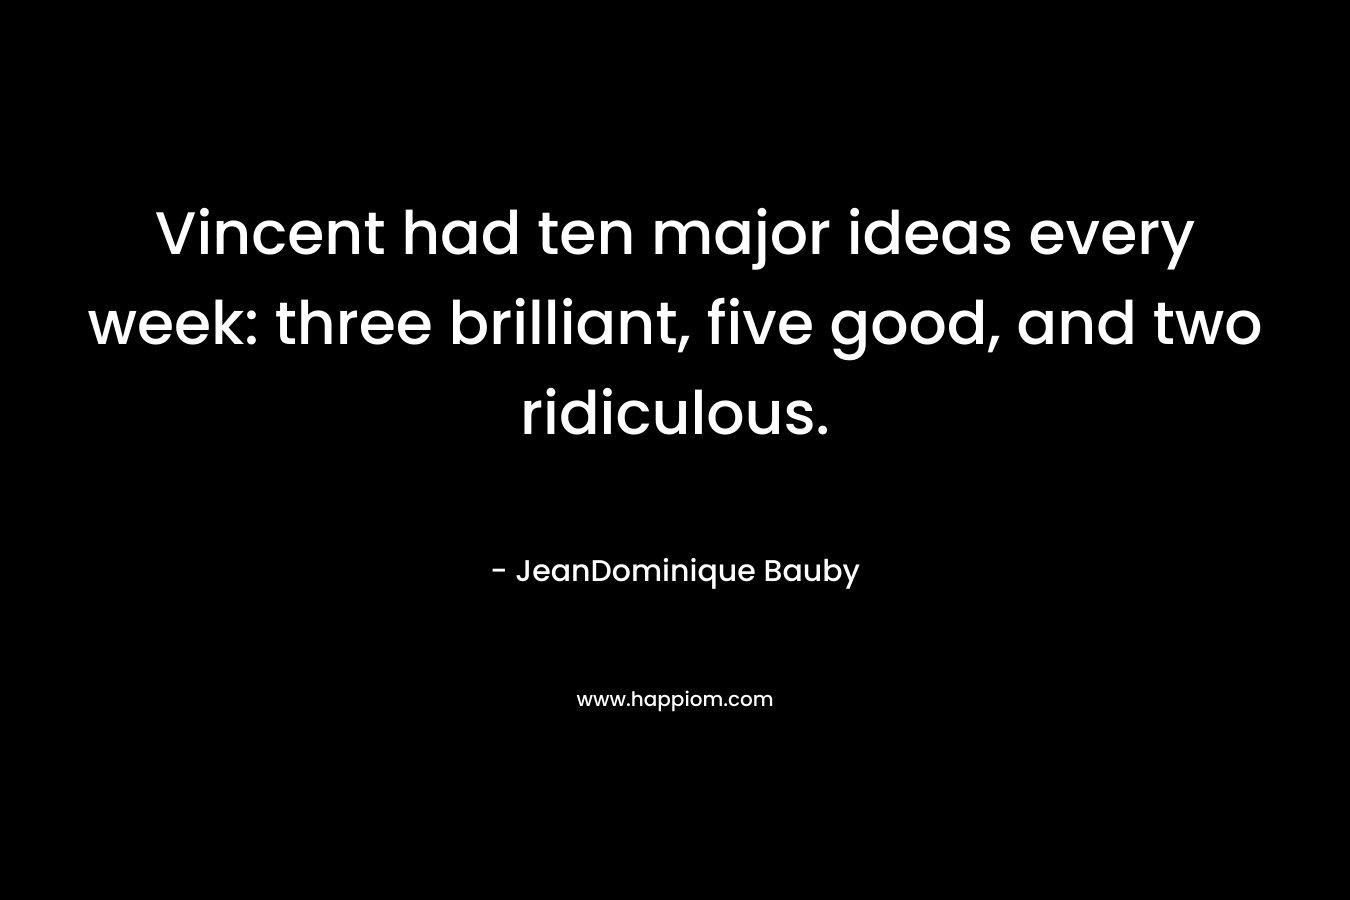 Vincent had ten major ideas every week: three brilliant, five good, and two ridiculous. – JeanDominique Bauby